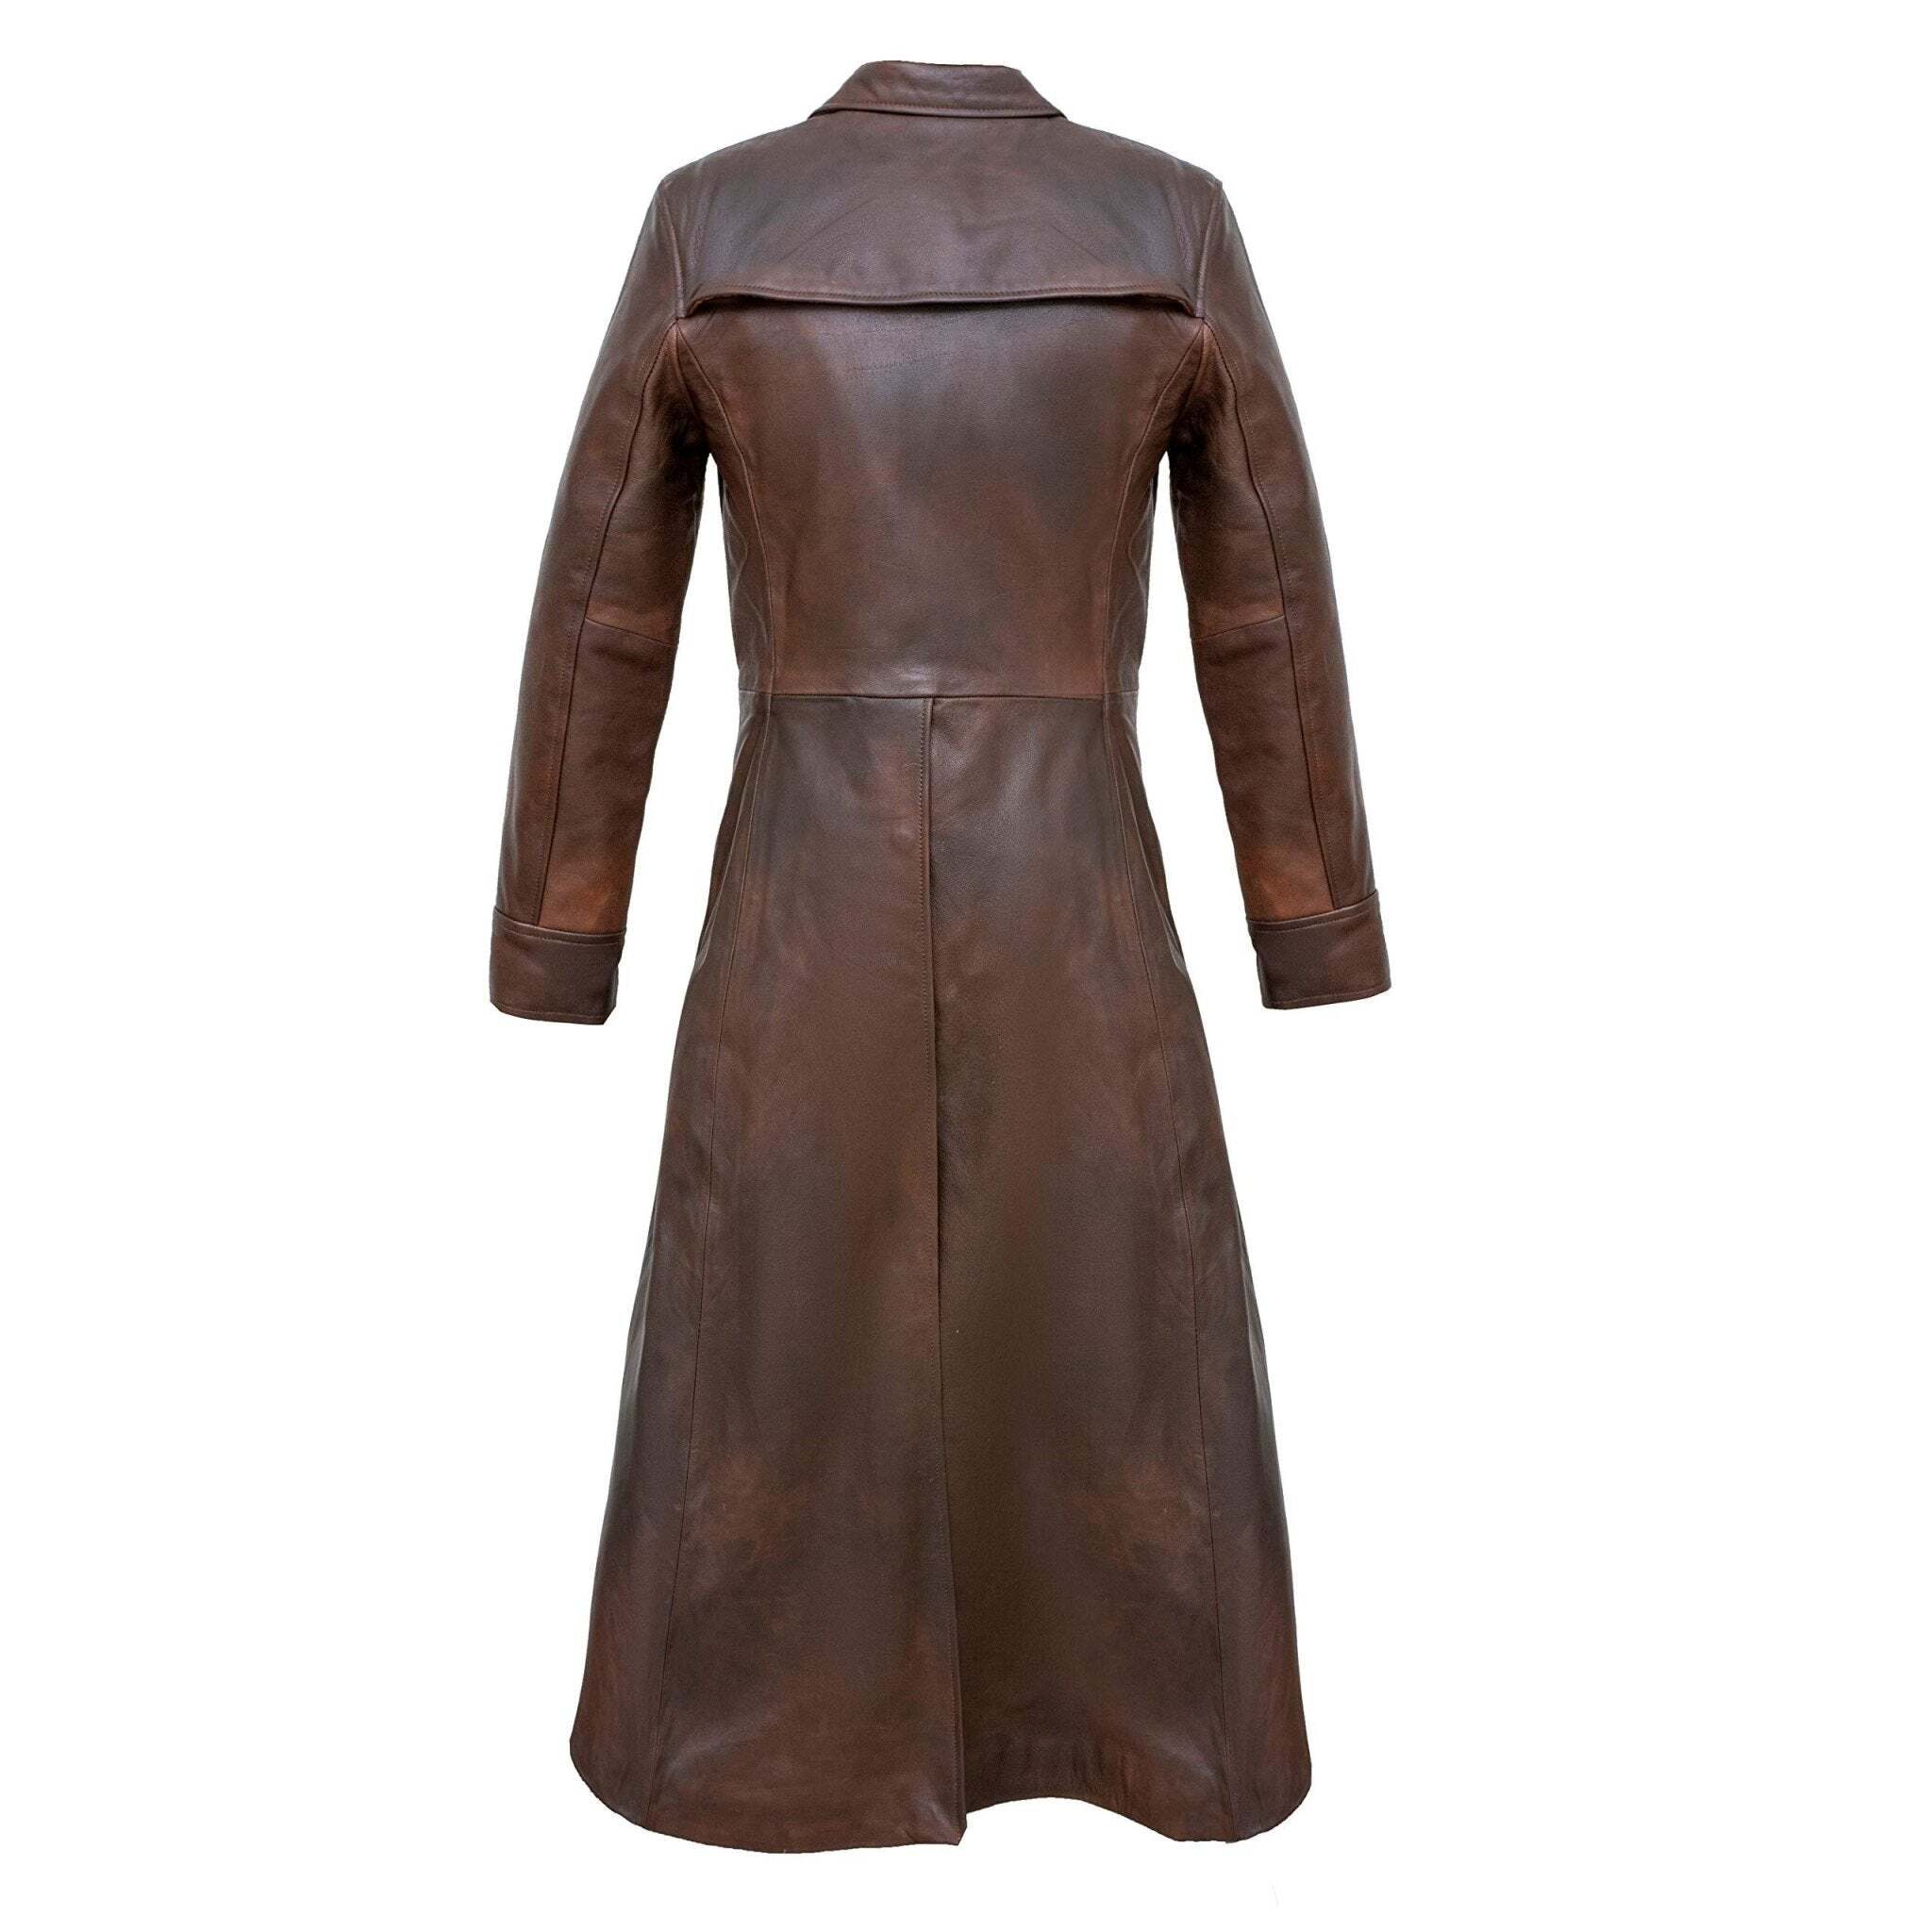 Detective Brown Gothic Long Leather Trench Coat